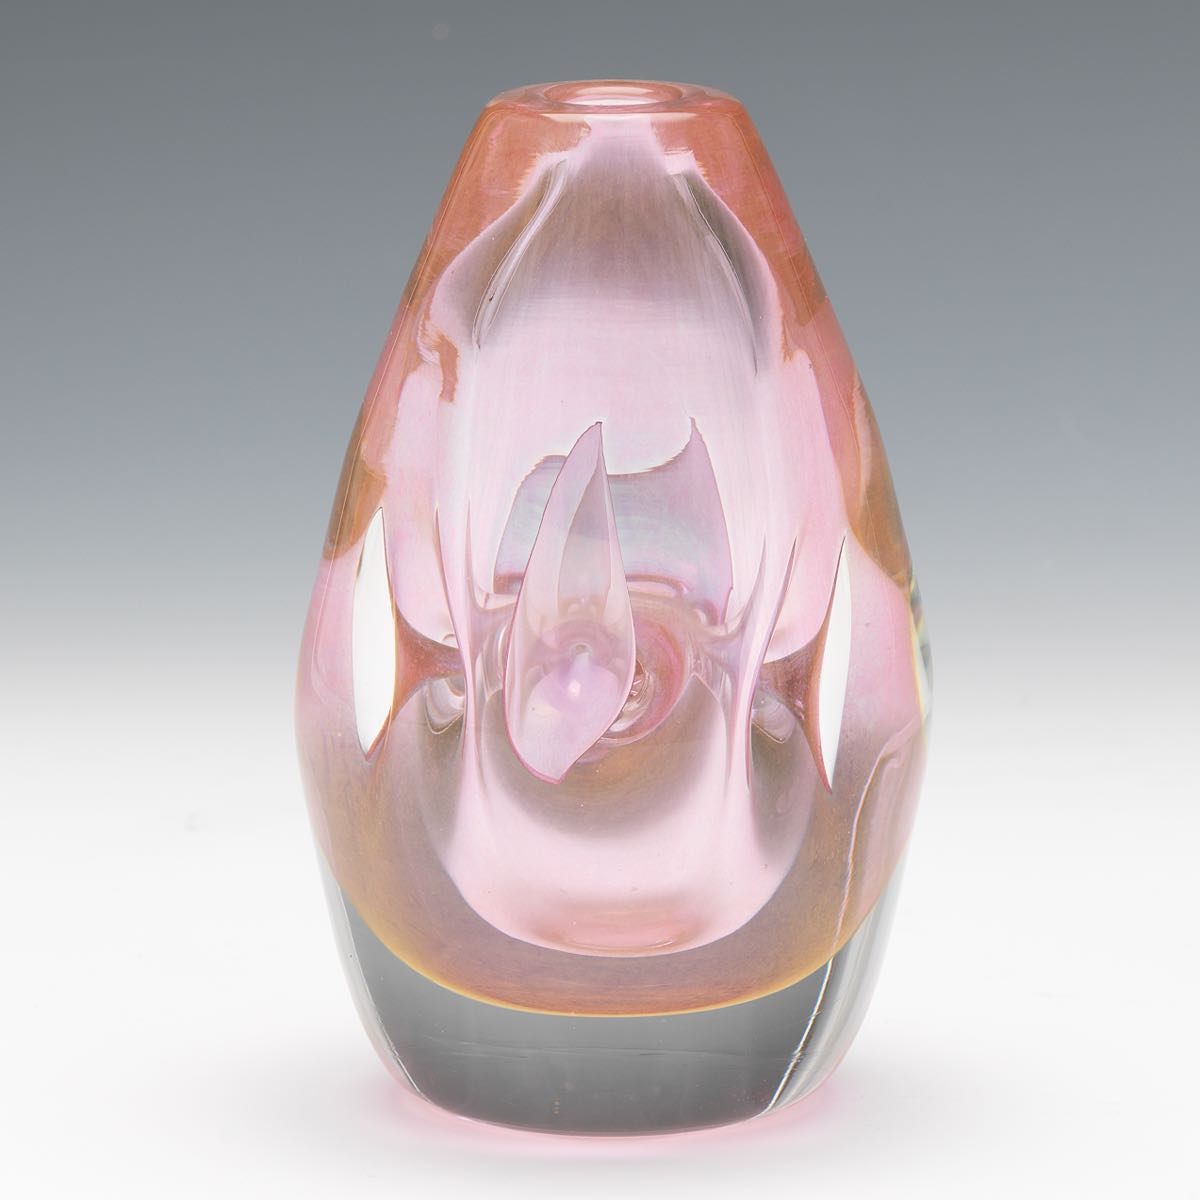 Dominick Labino (American, 1910-1987) 5-1/2" x 3-1/2"Blown glass vase in clear and colorless pink - Image 2 of 8